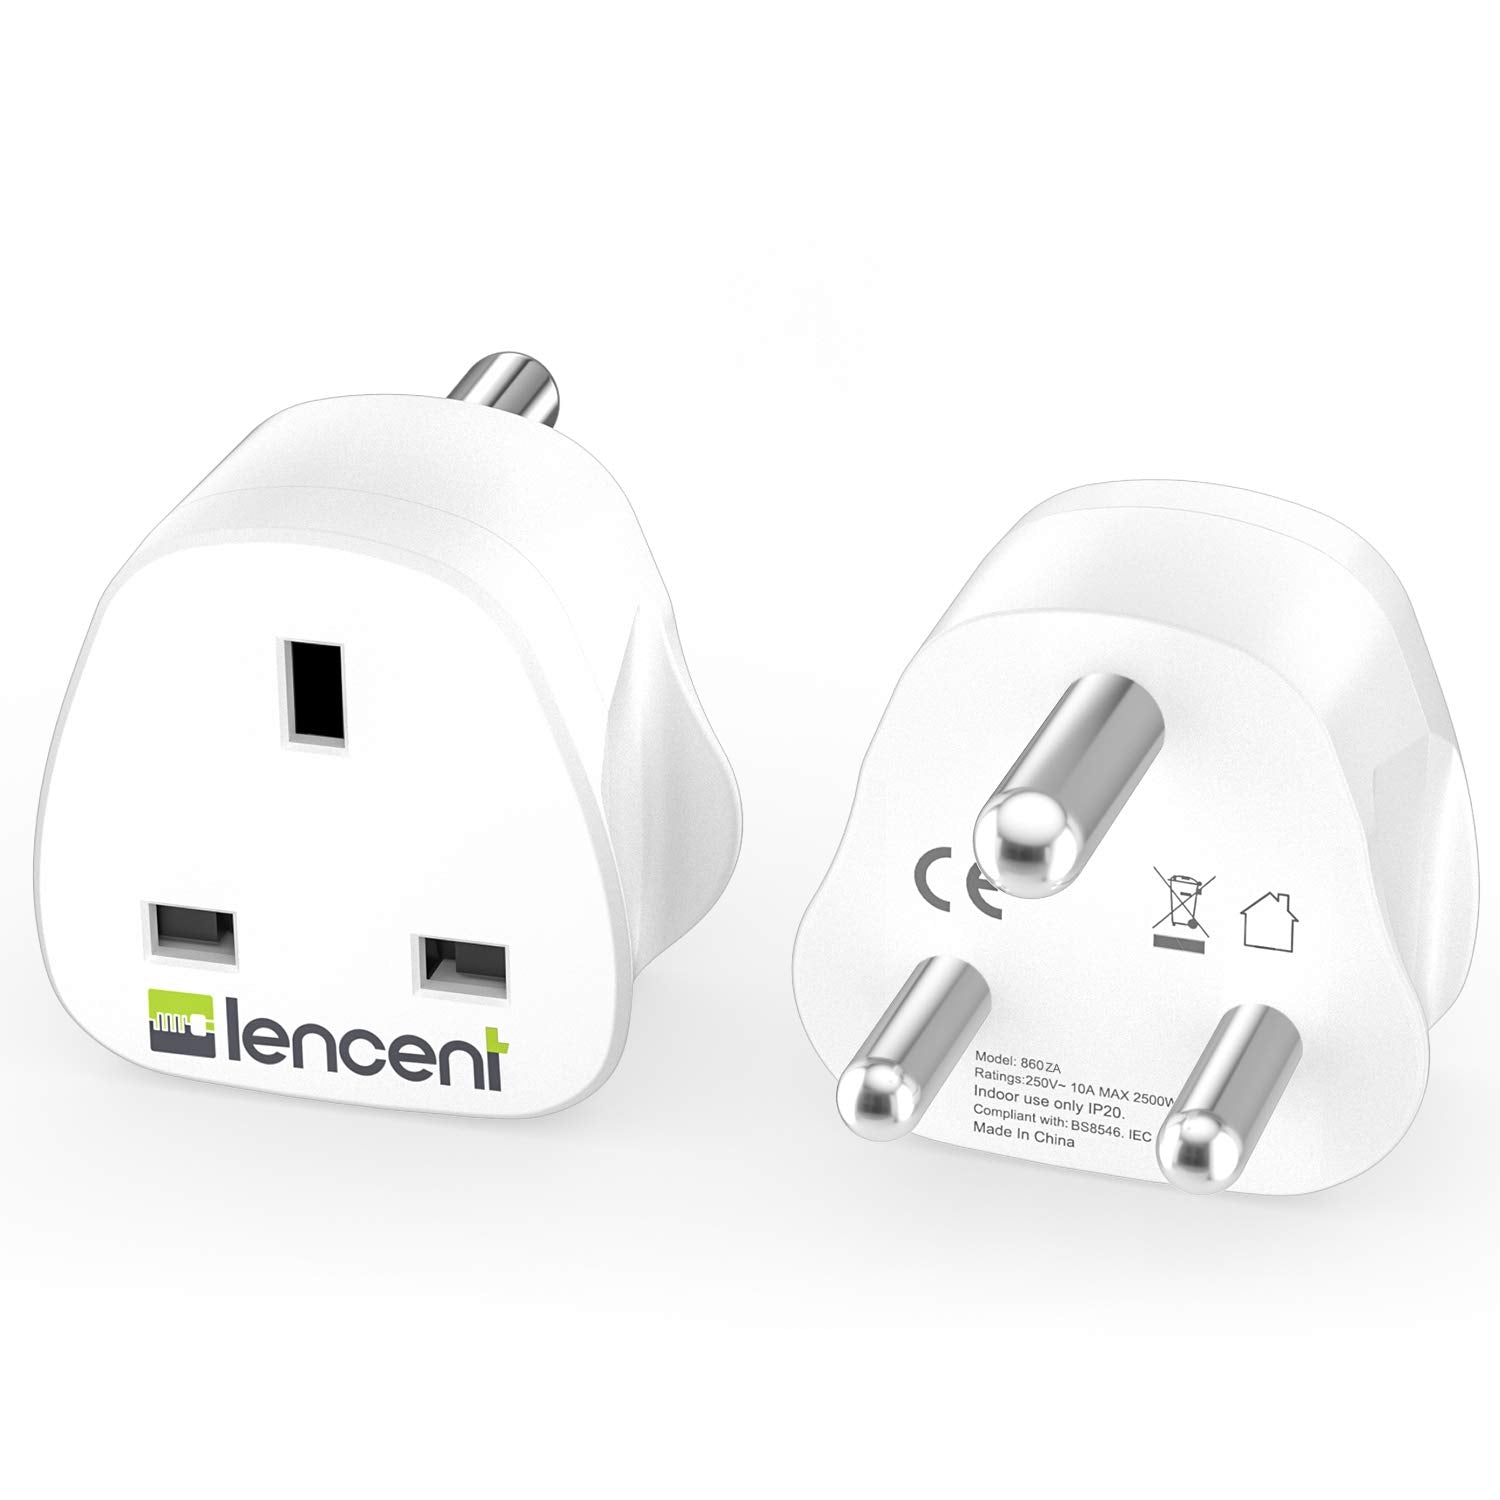 LENCENT 2X UK to South Africa Plug Adapter, Grounded SA Travel Adapter for South Africa, Namibia, Swaziland, Lesotho, Bhutan, Botswana, Mozambique and more (Type M)